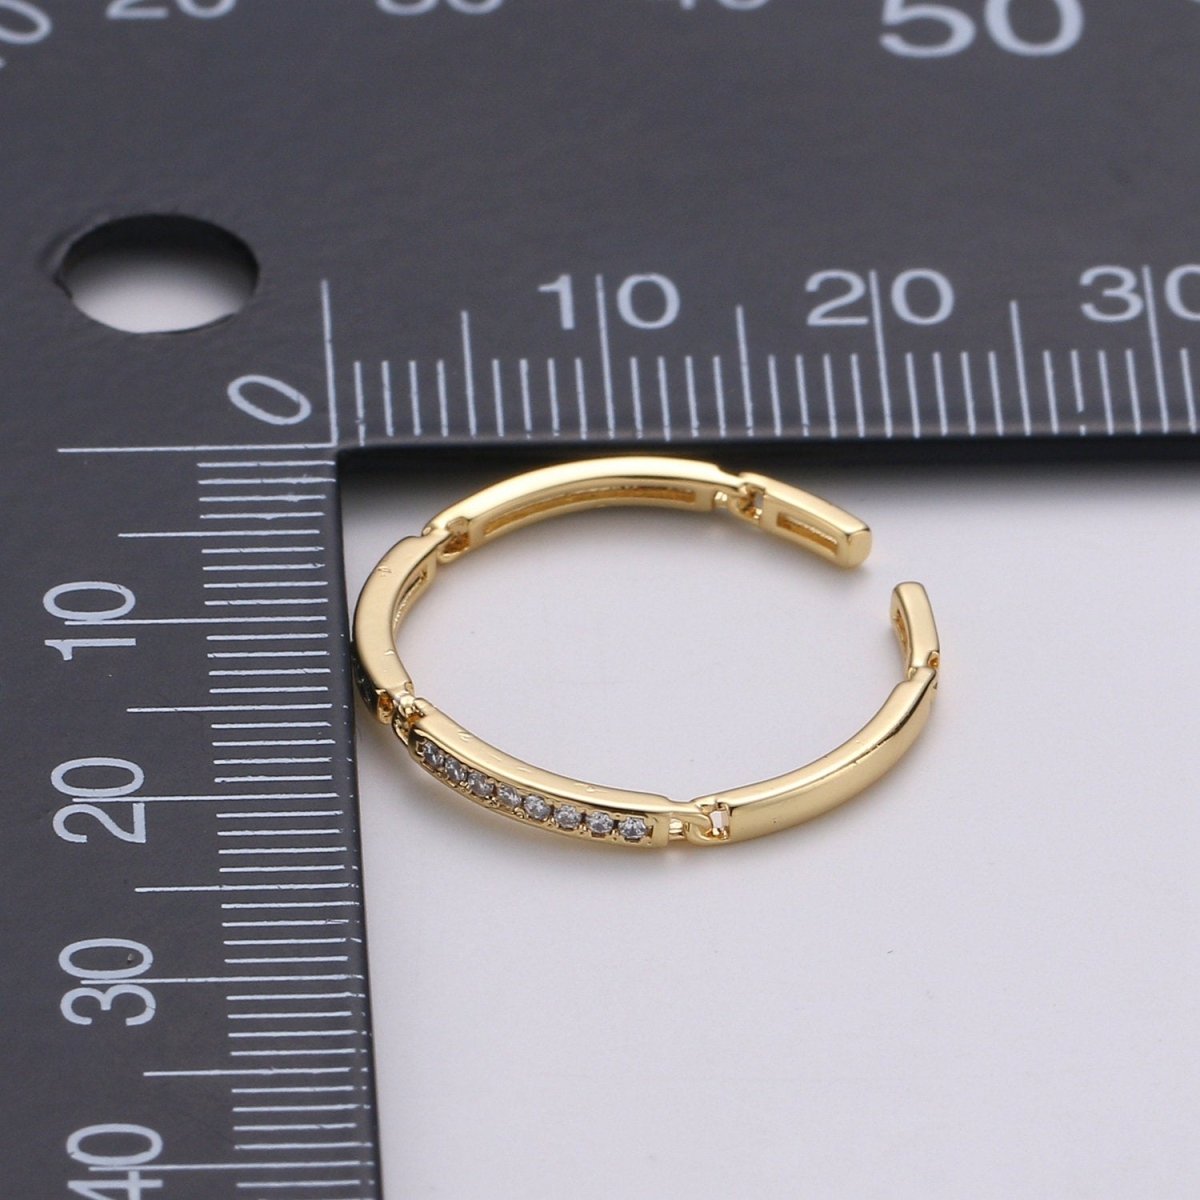 Dainty Ring, Gold Vermeil Minimalist Ring, Stacking Ring, Simple Open Ring, Cubic Zirconia Adjustable Ring, Thin Ring, Gift for Her R-127 - DLUXCA